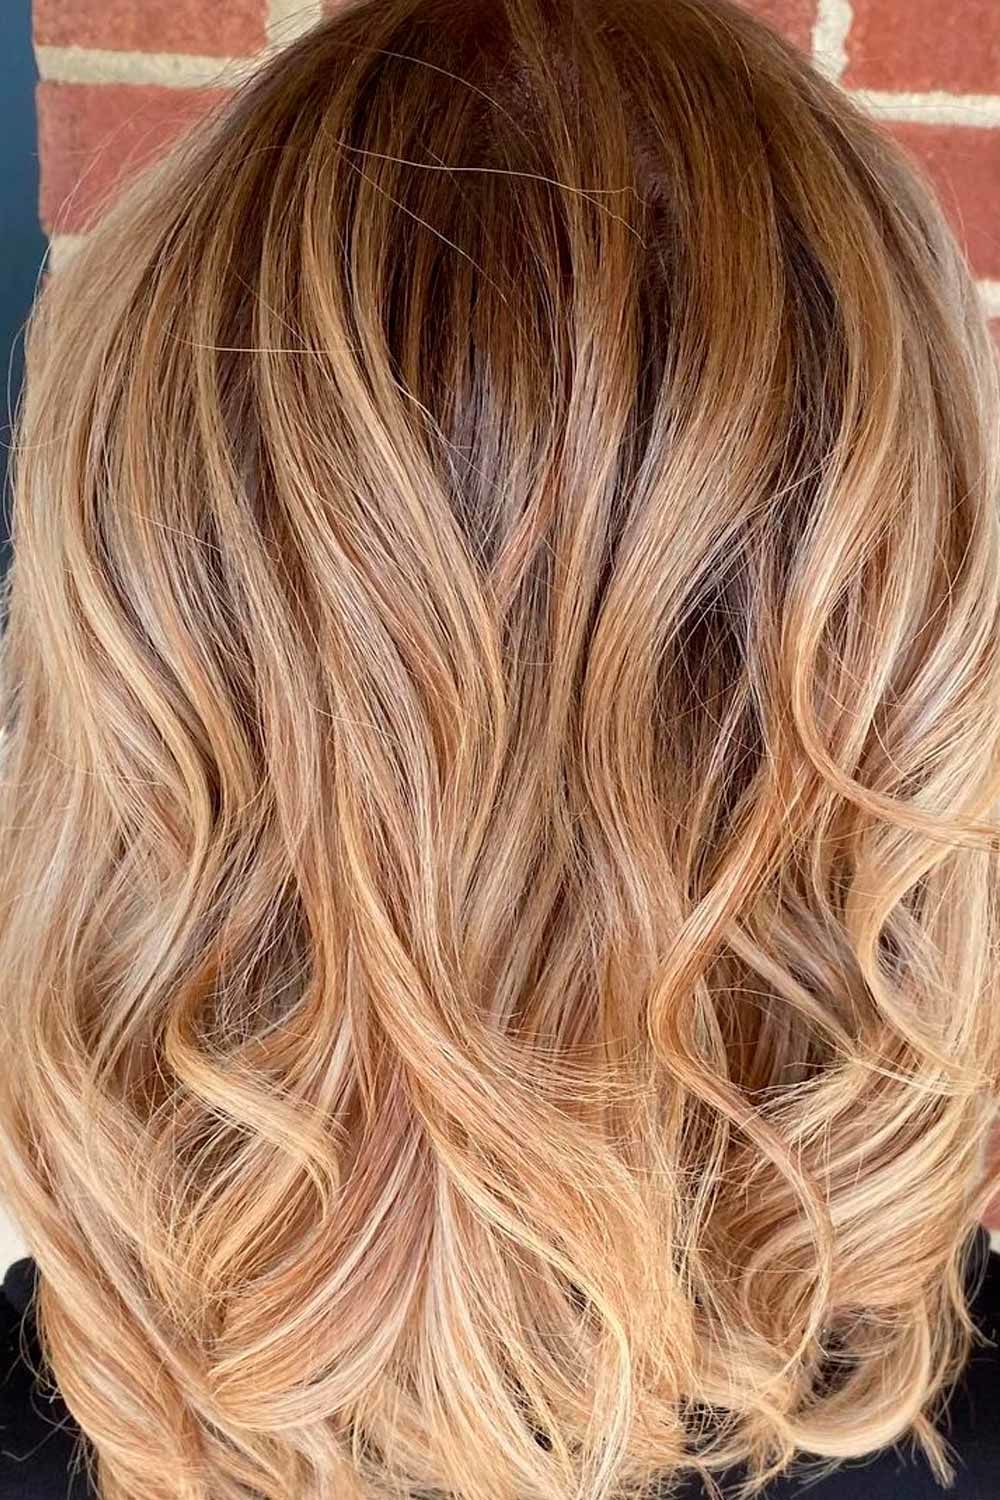 35 Honey Brown Hair Color Ideas for Warm and Natural Looks - Hood MWR